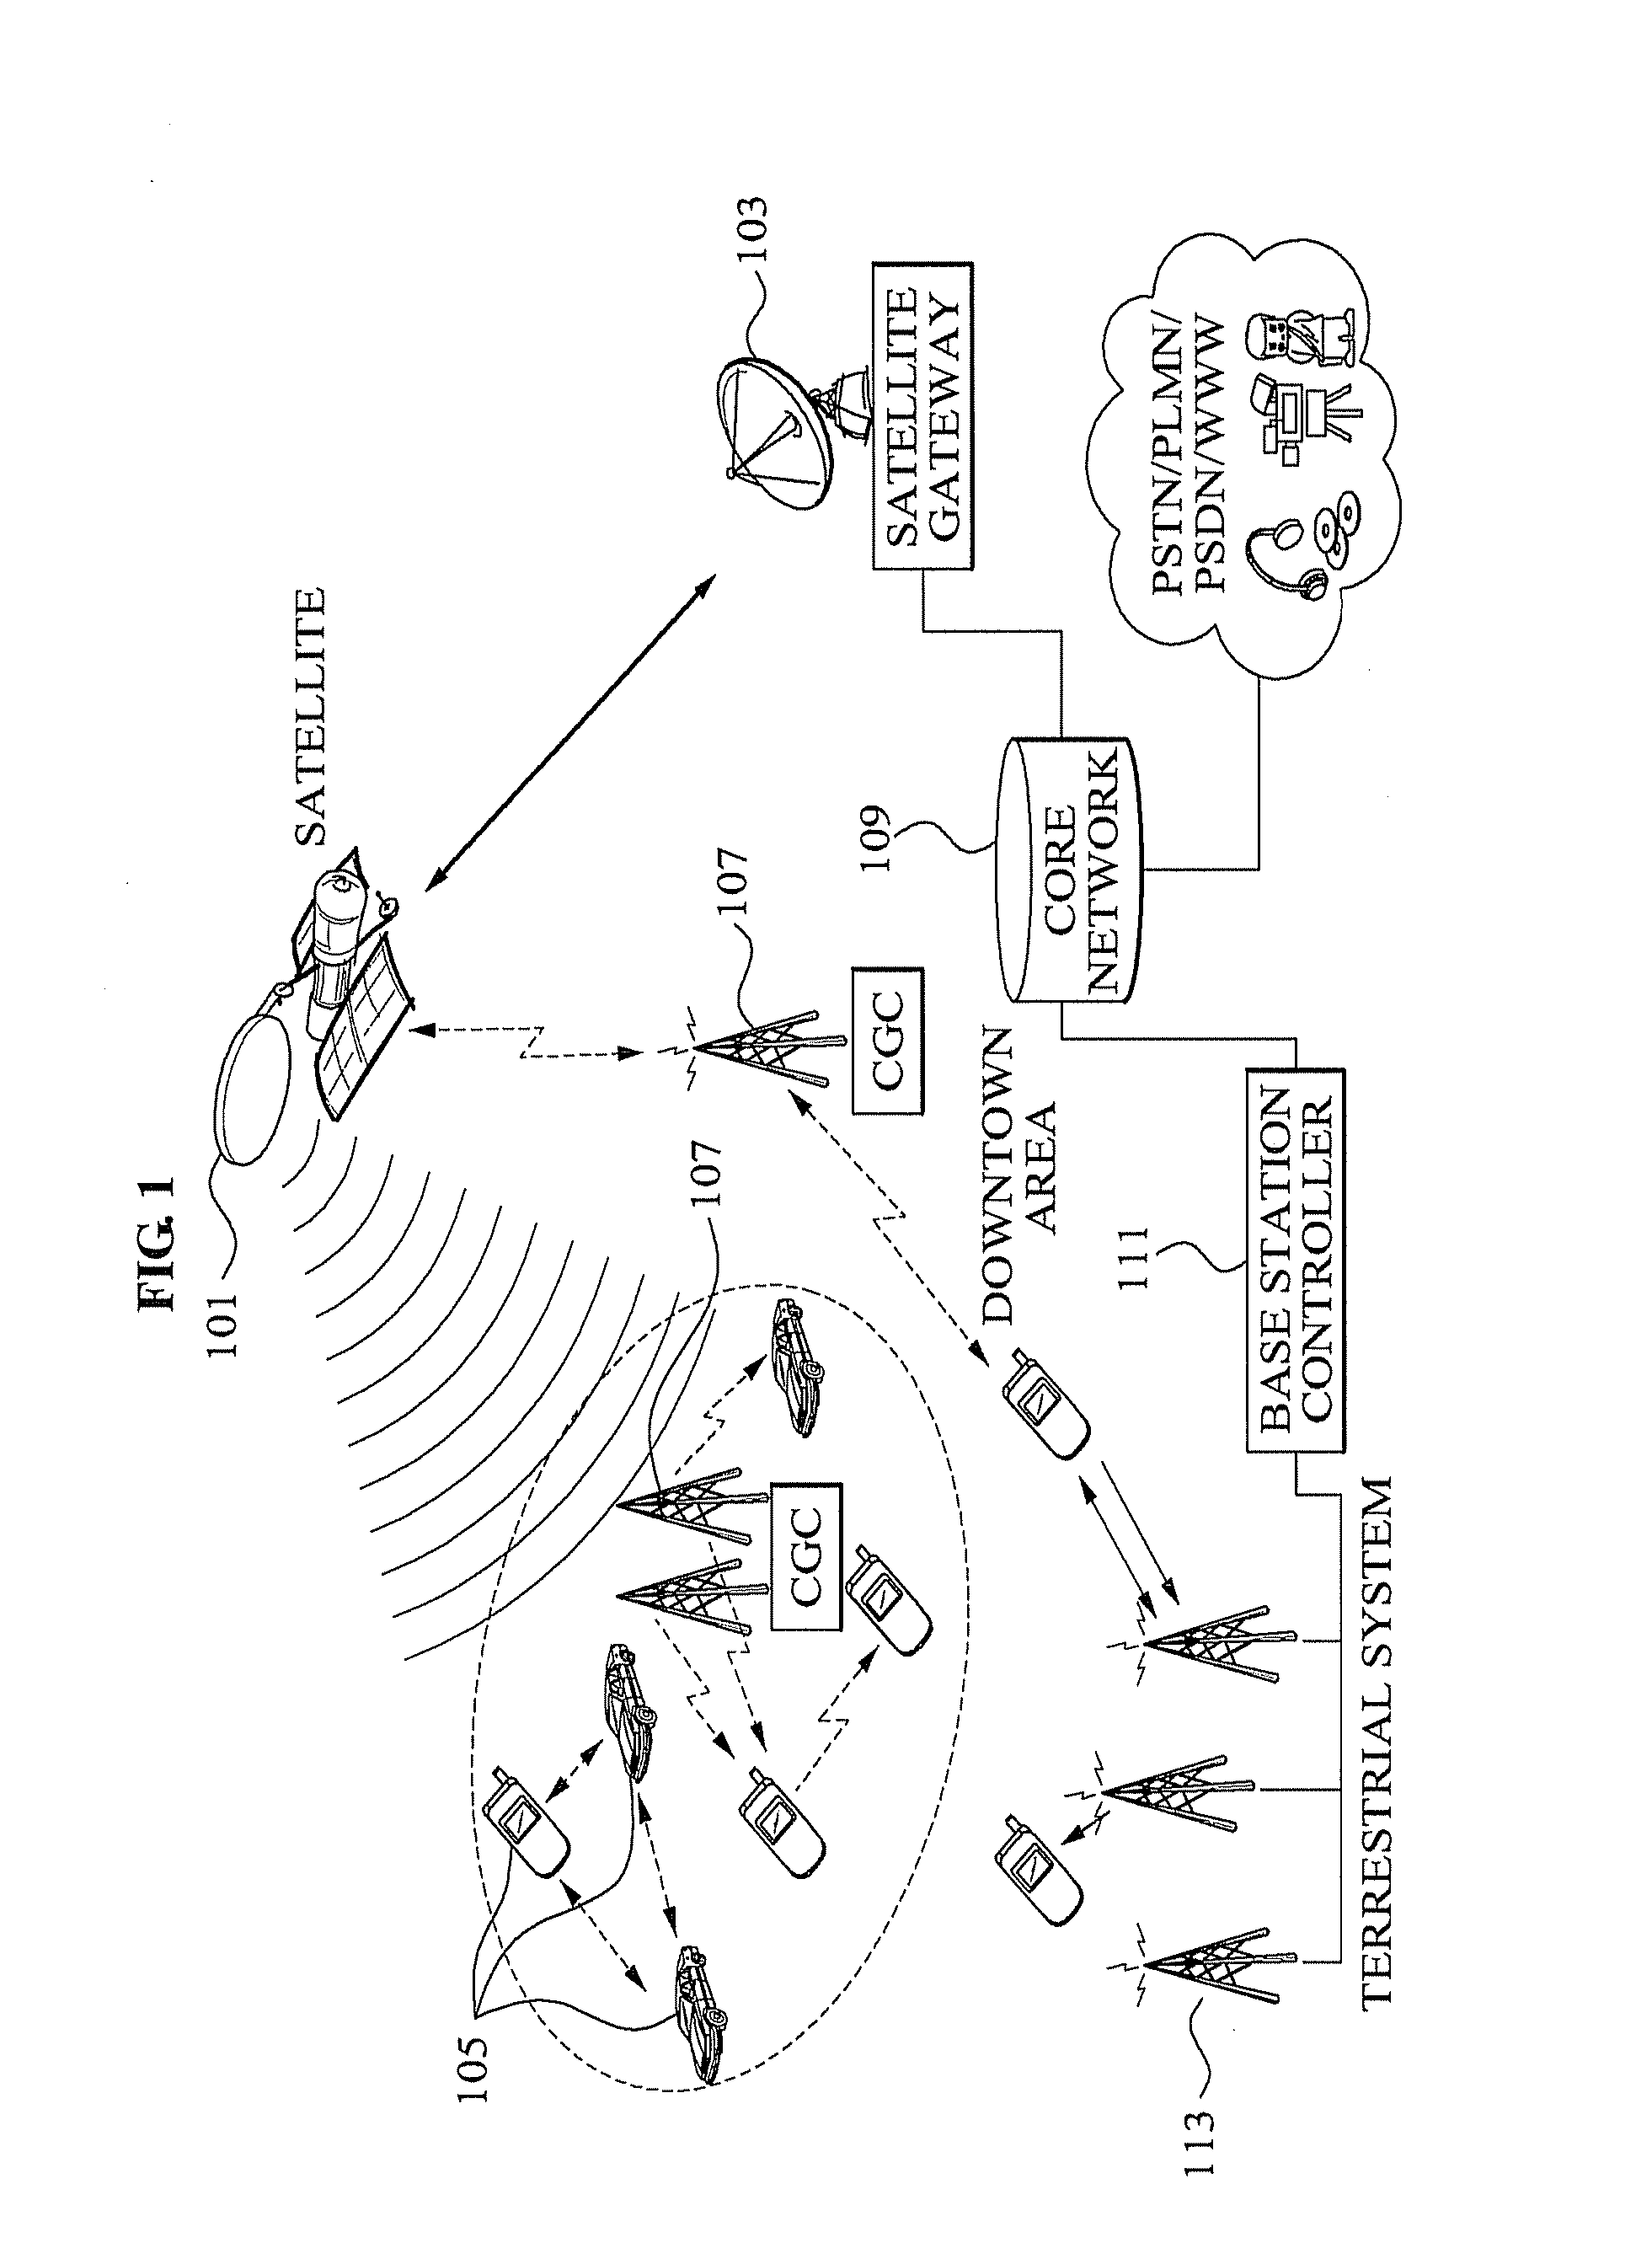 Apparatus and method for sharing of frequency allocated for mobile satellite service using satellite and its complementary ground component